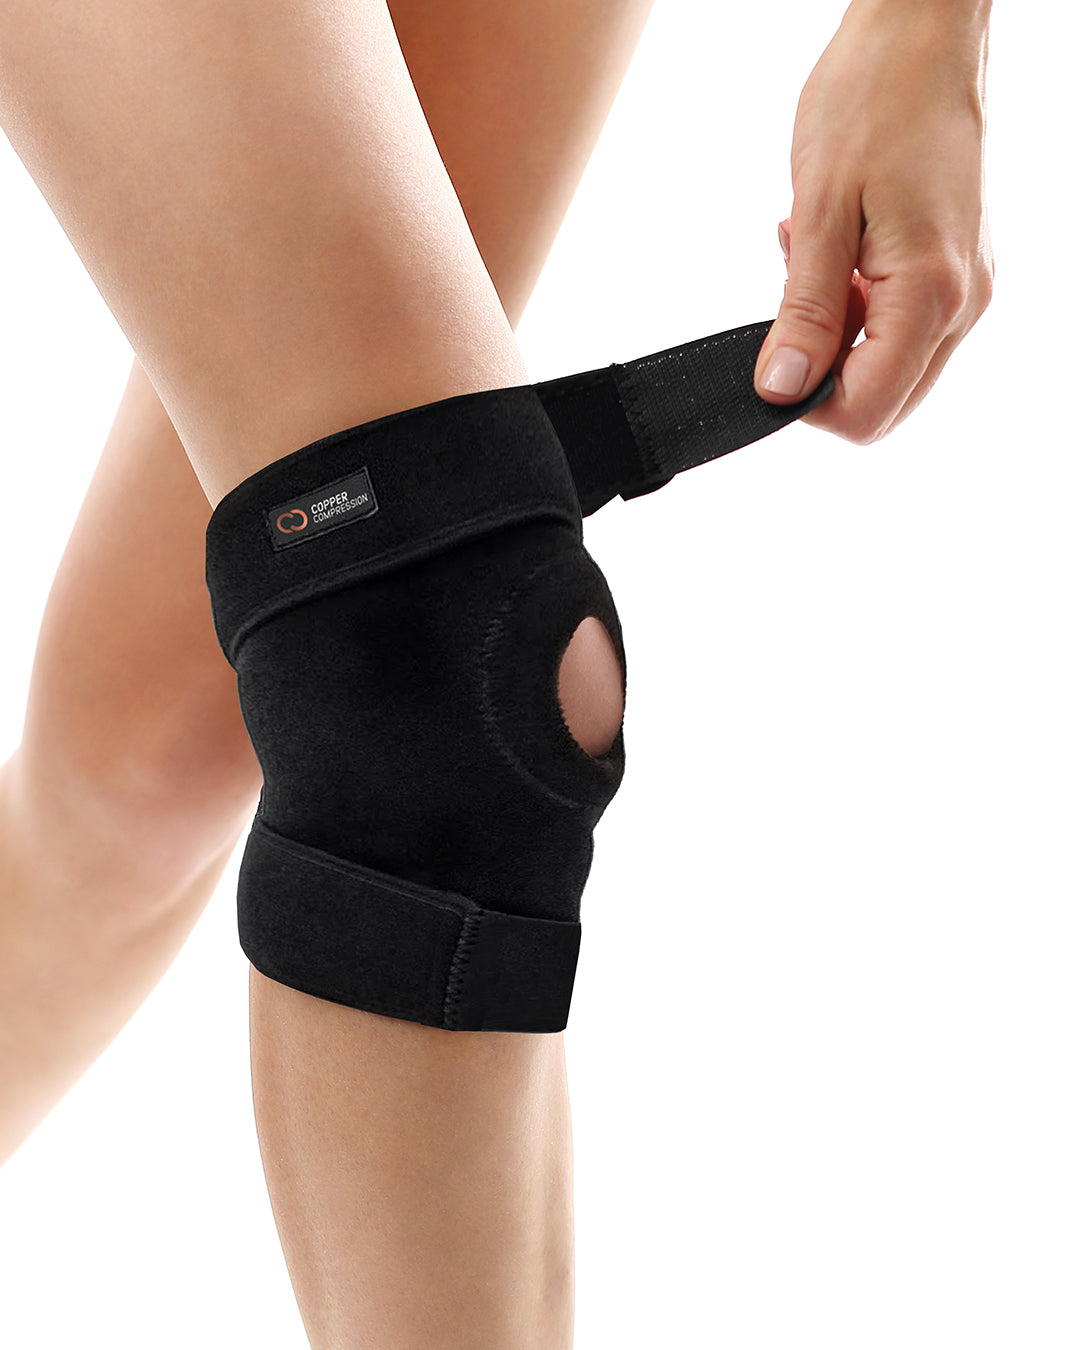 Copper Compression PowerKnit Knee Support Orthopedic Brace. Lab-tested  15-20mmHg. Sleeve for Pain, ACL, Joint, Meniscus Tear. Running, Basketball